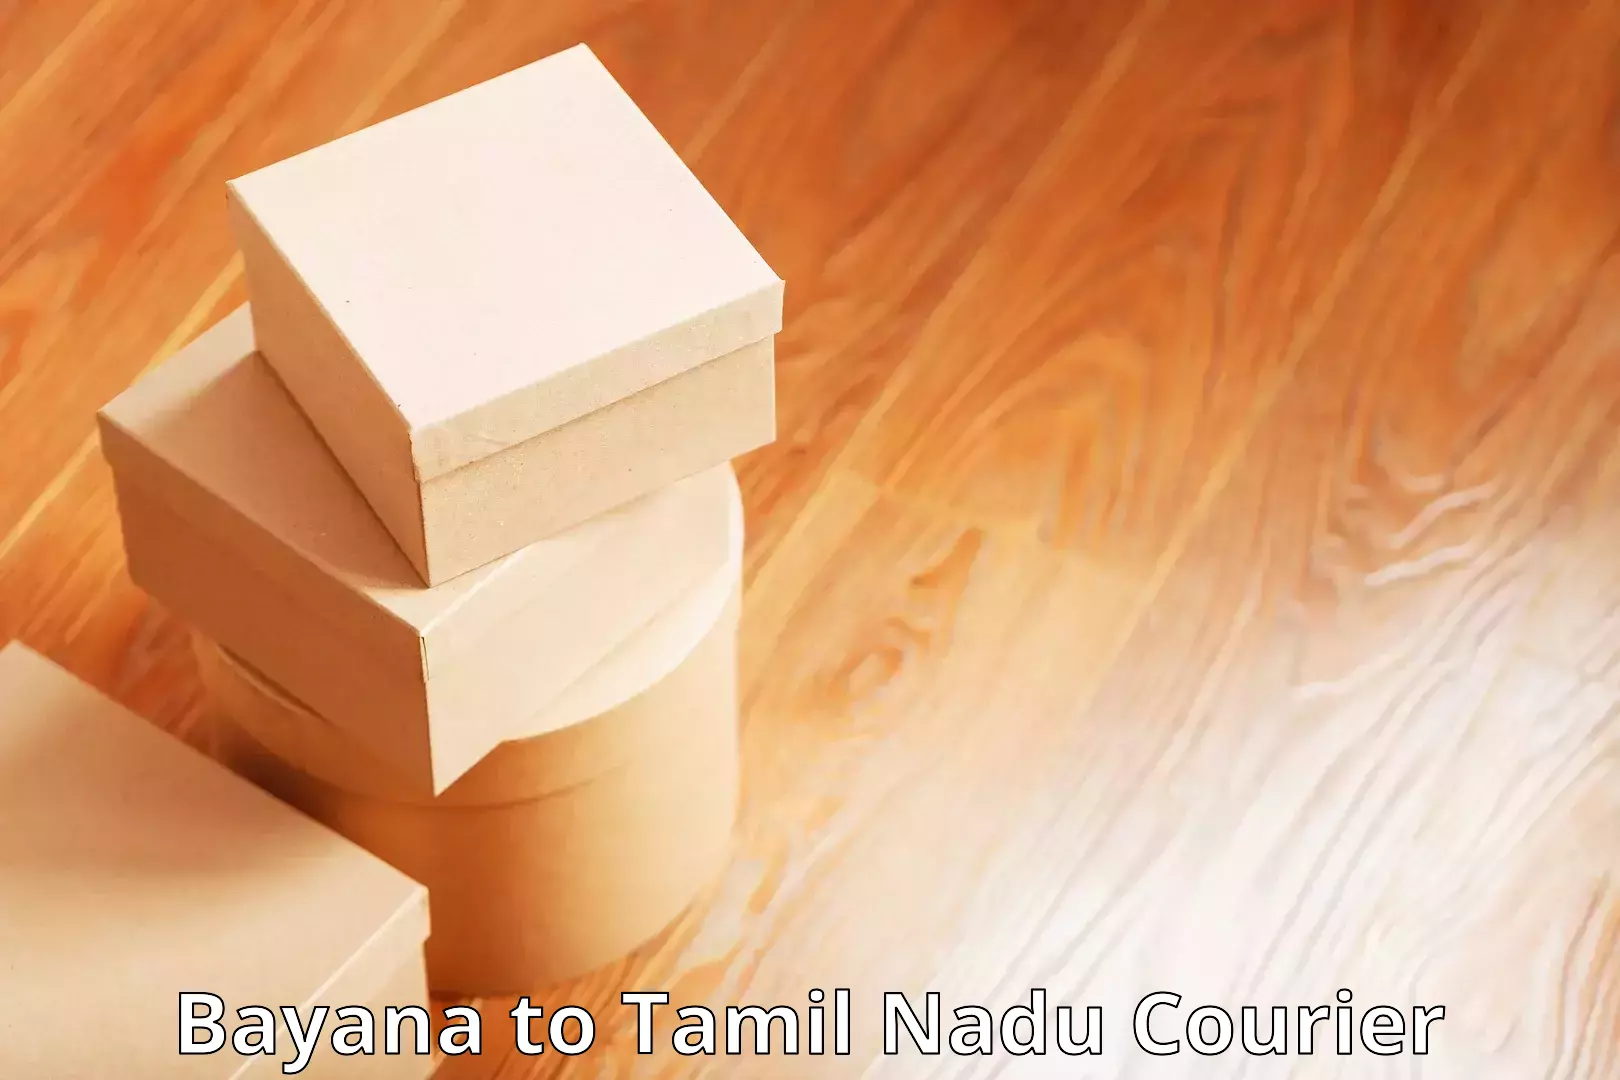 Round-the-clock parcel delivery Bayana to Tamil Nadu